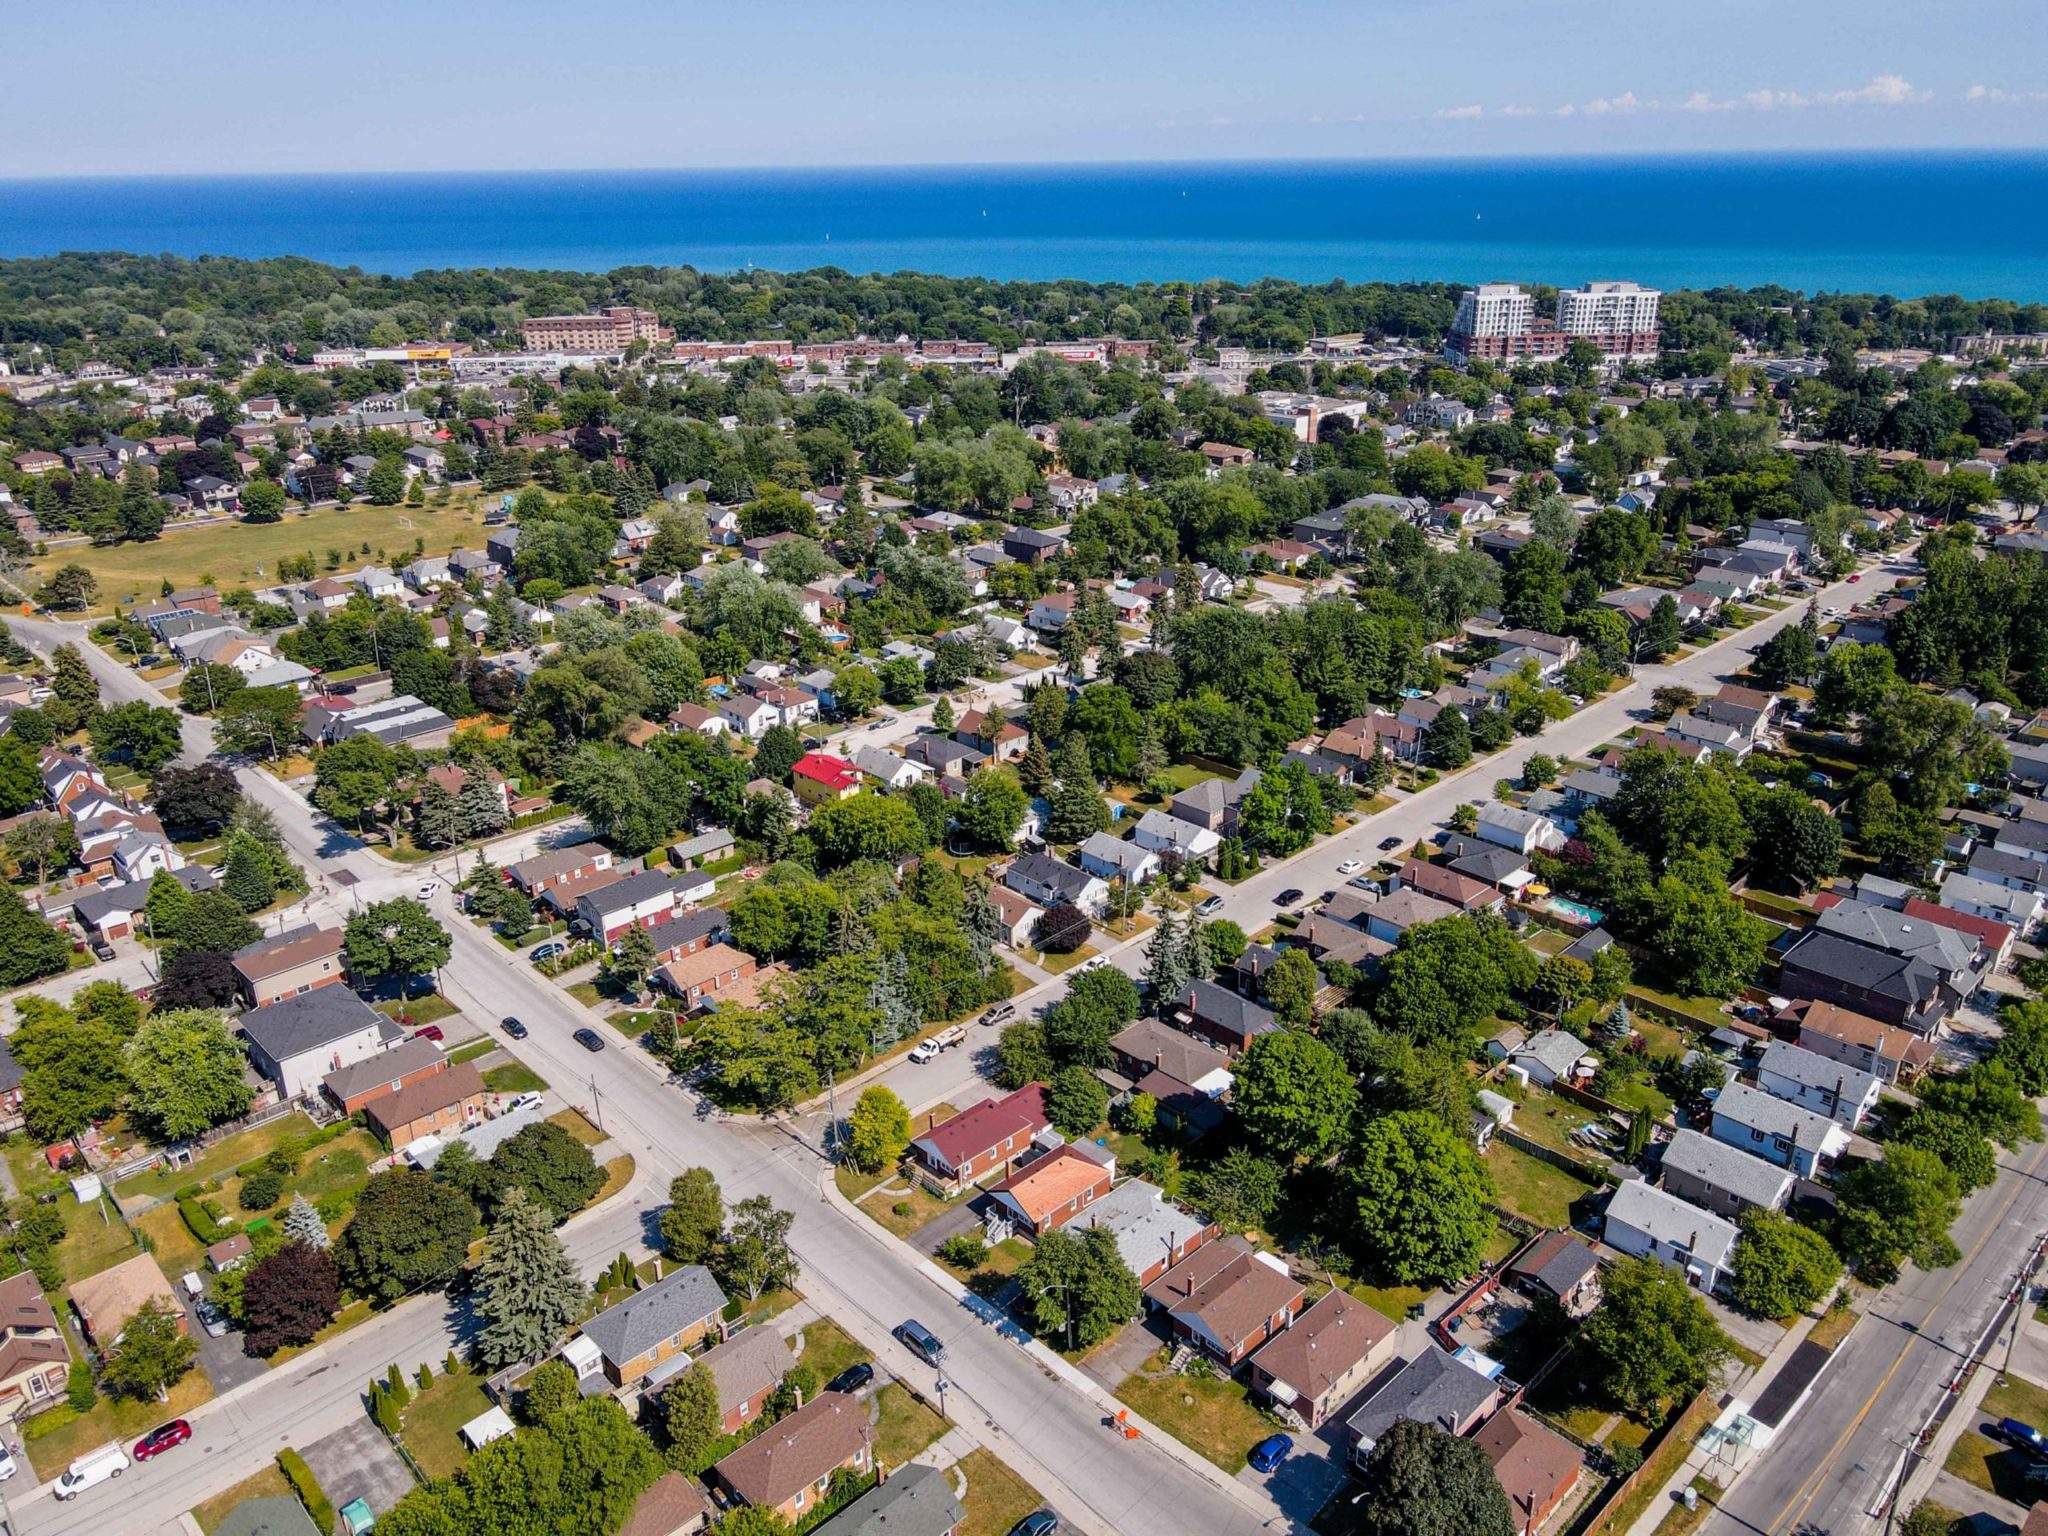 Aerial view of Birchcliffe-Cliffside, a suburb of Scarborough.